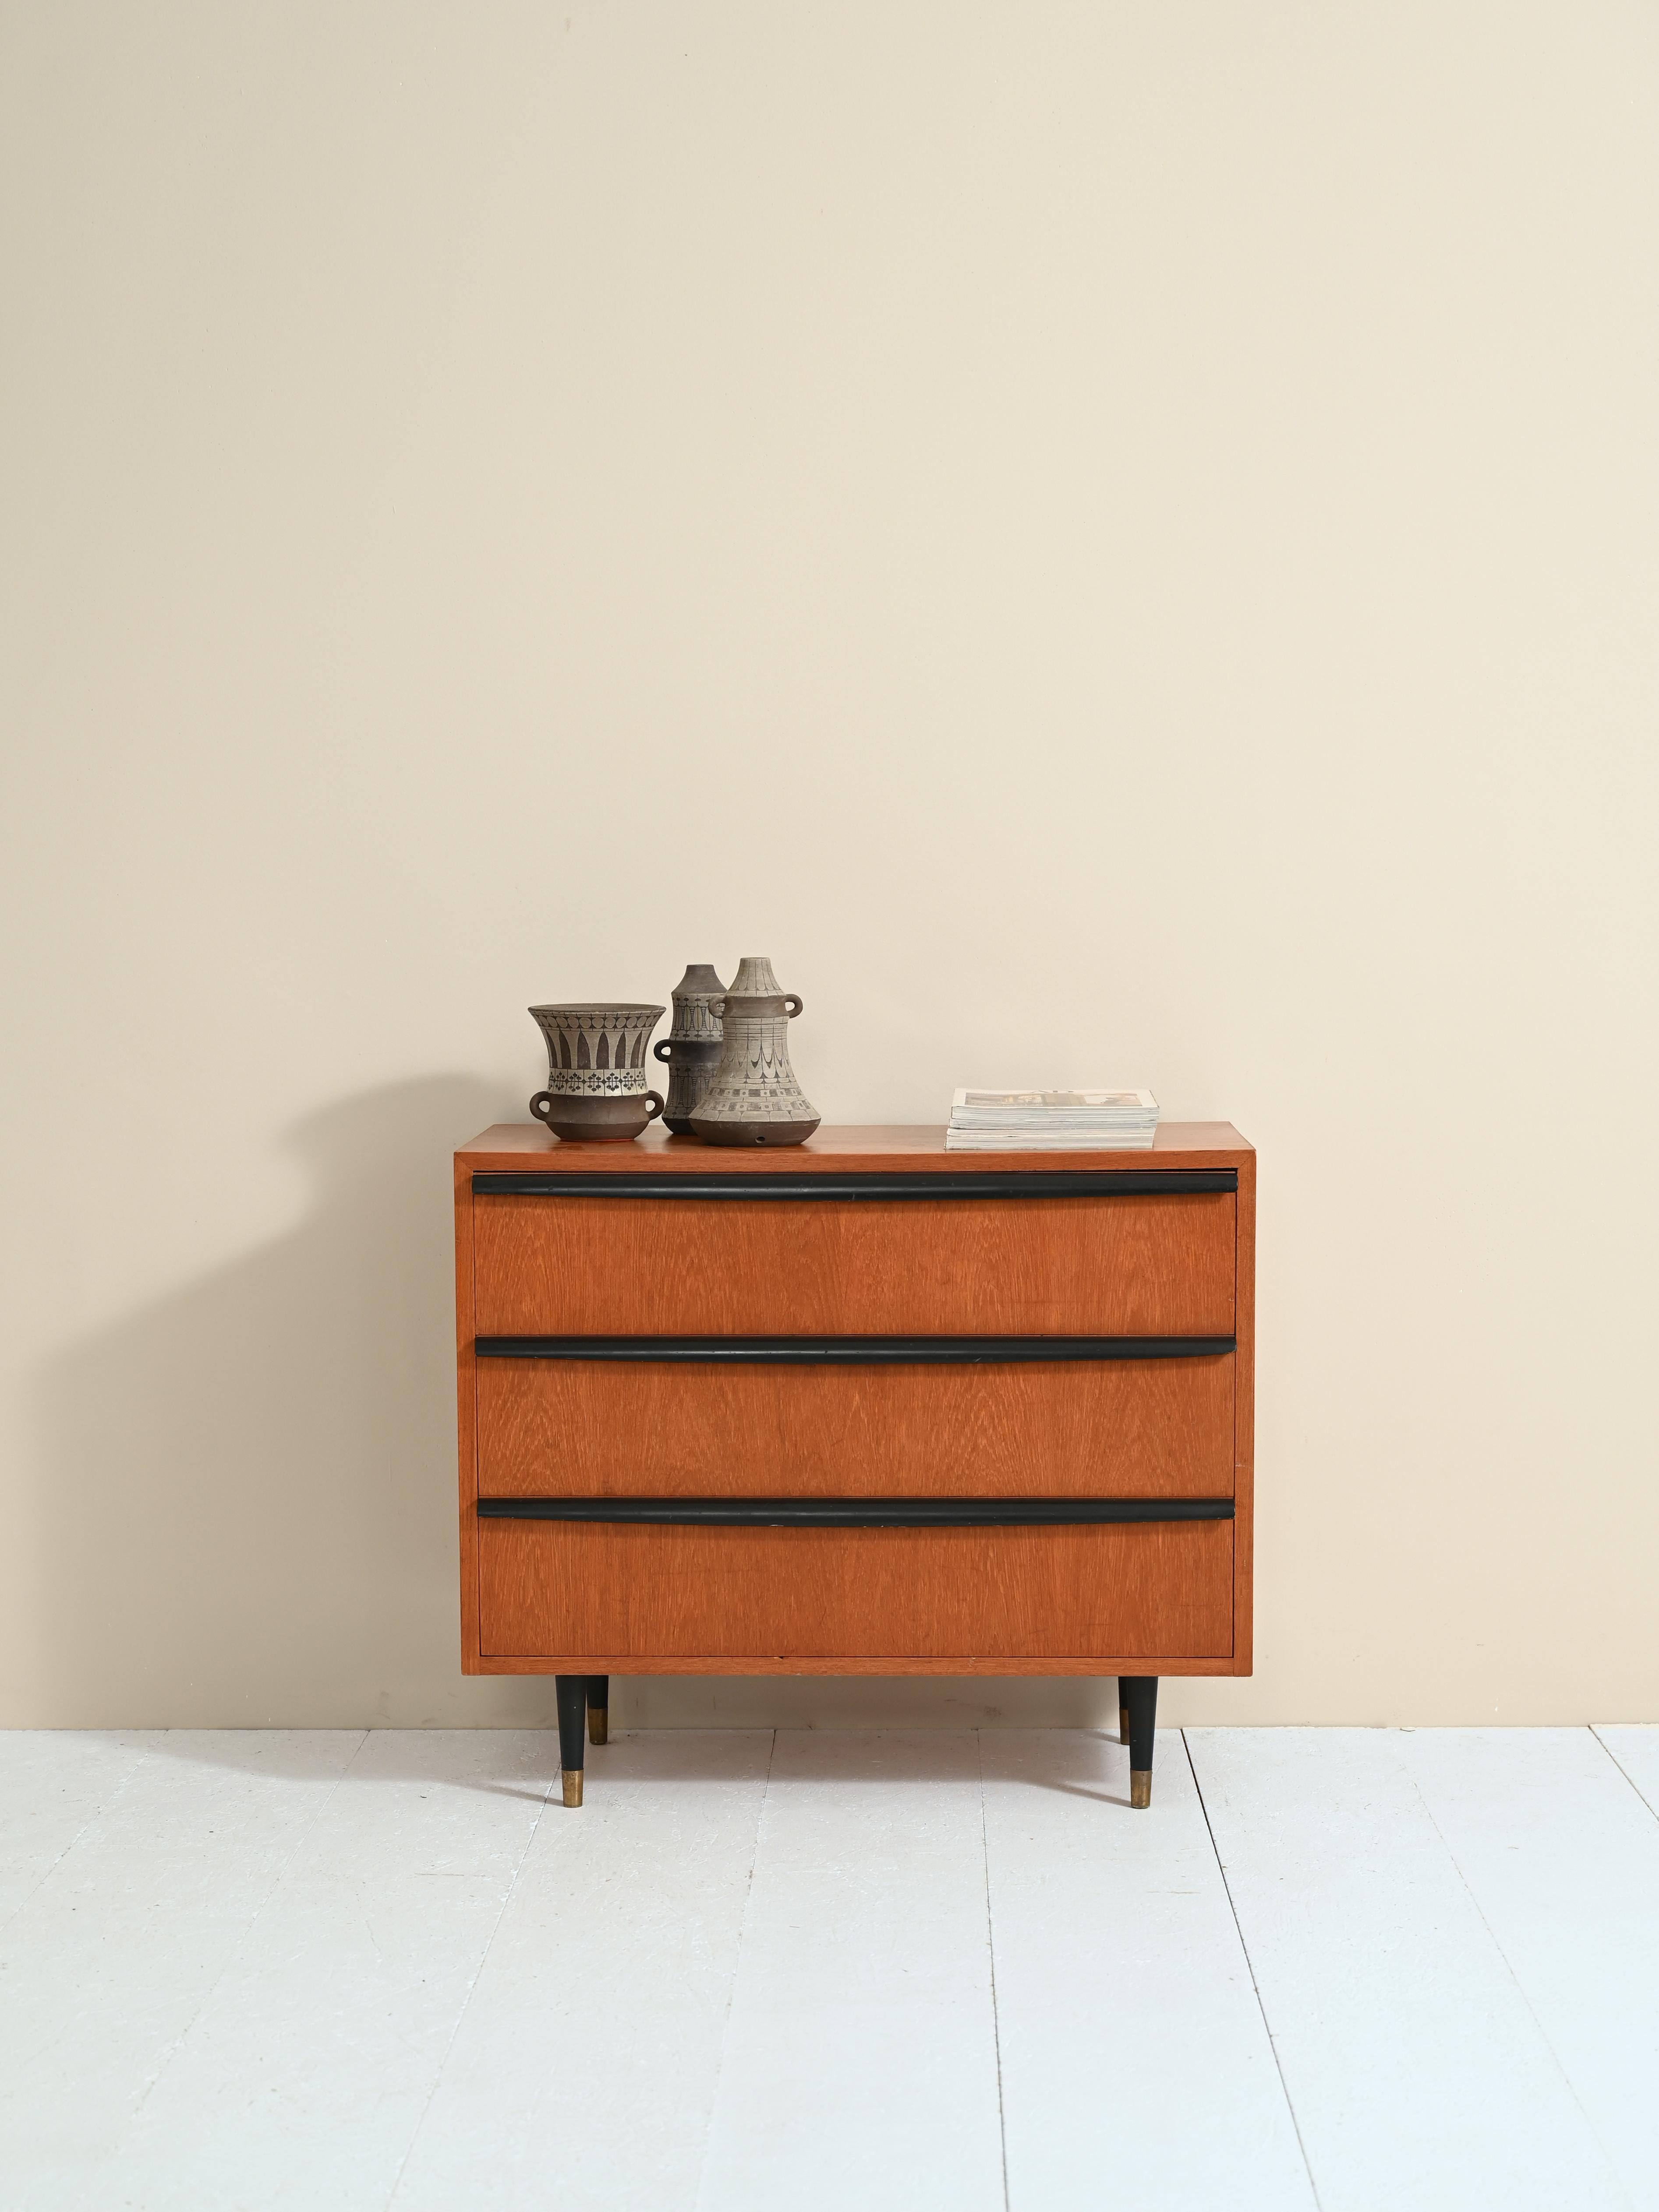 Original Scandinavian cabinet with three drawers and brass finials.

The special feature of this cabinet is undoubtedly the handle of the drawers formed by carved wooden slats 70 centimeters long and painted black like the legs.
The lower part